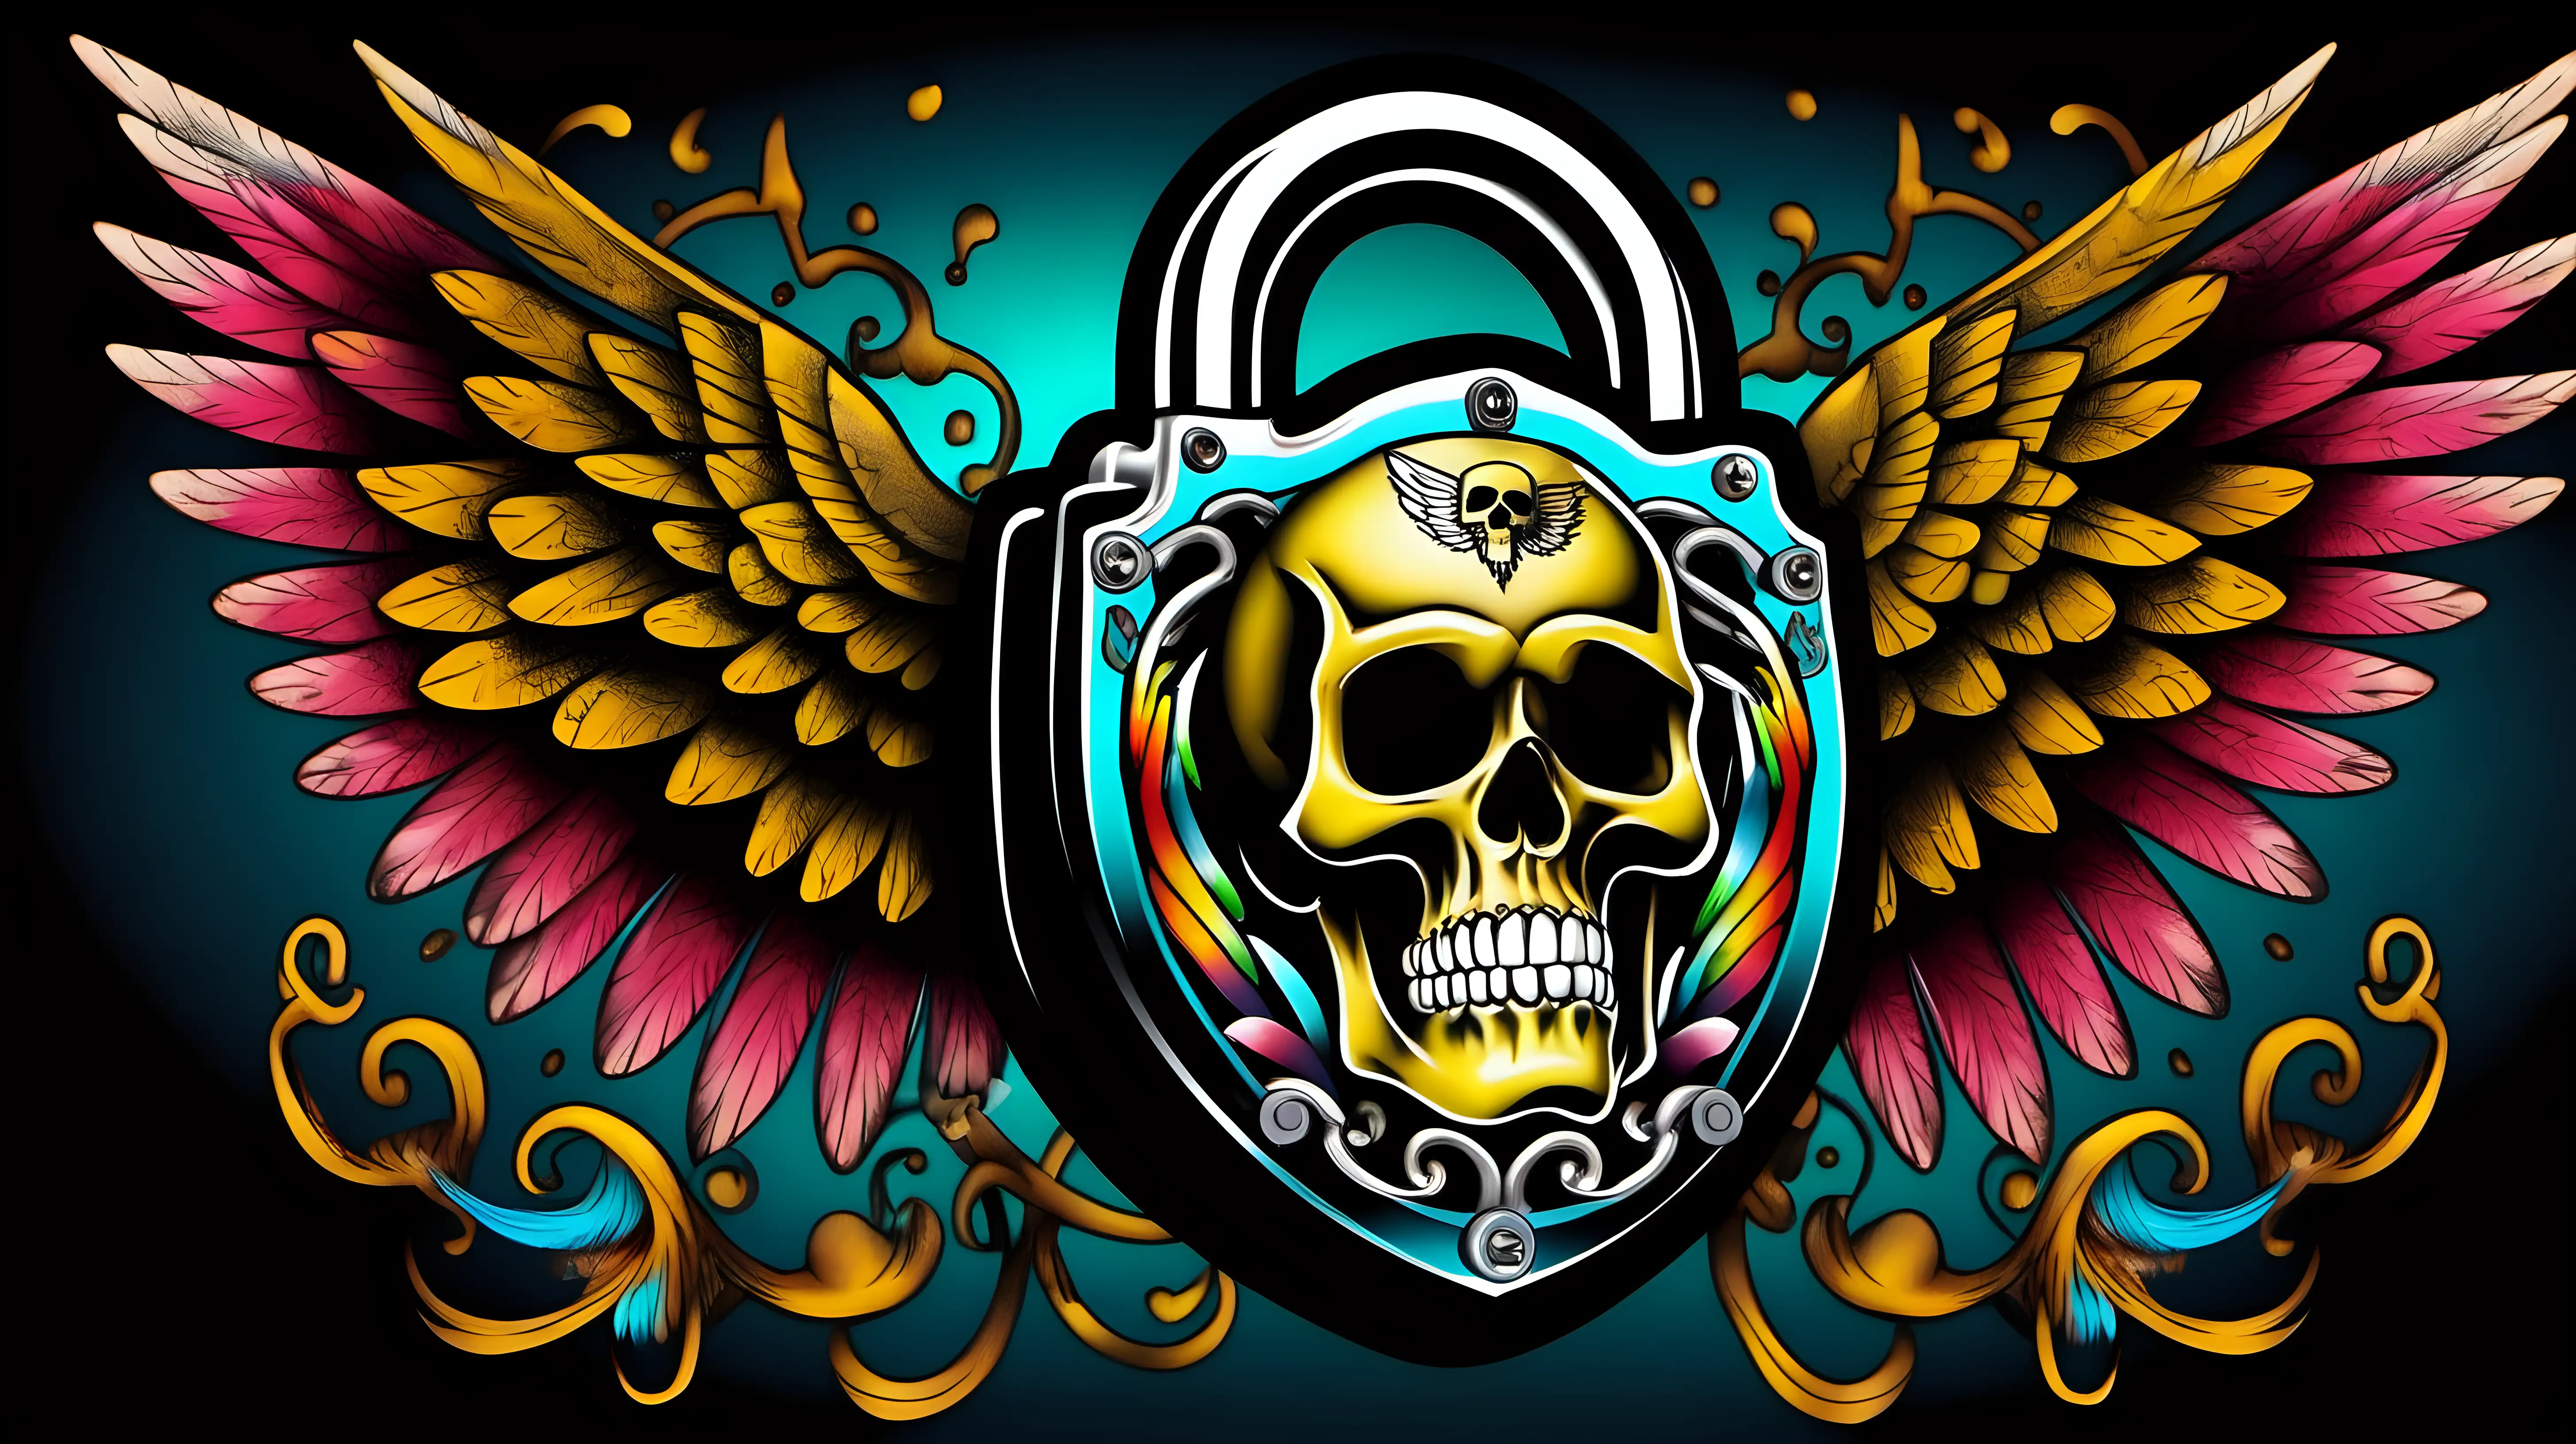 Colorful 3D Padlock with Wings and Skull OldSchool Tattoo Design on Black Background